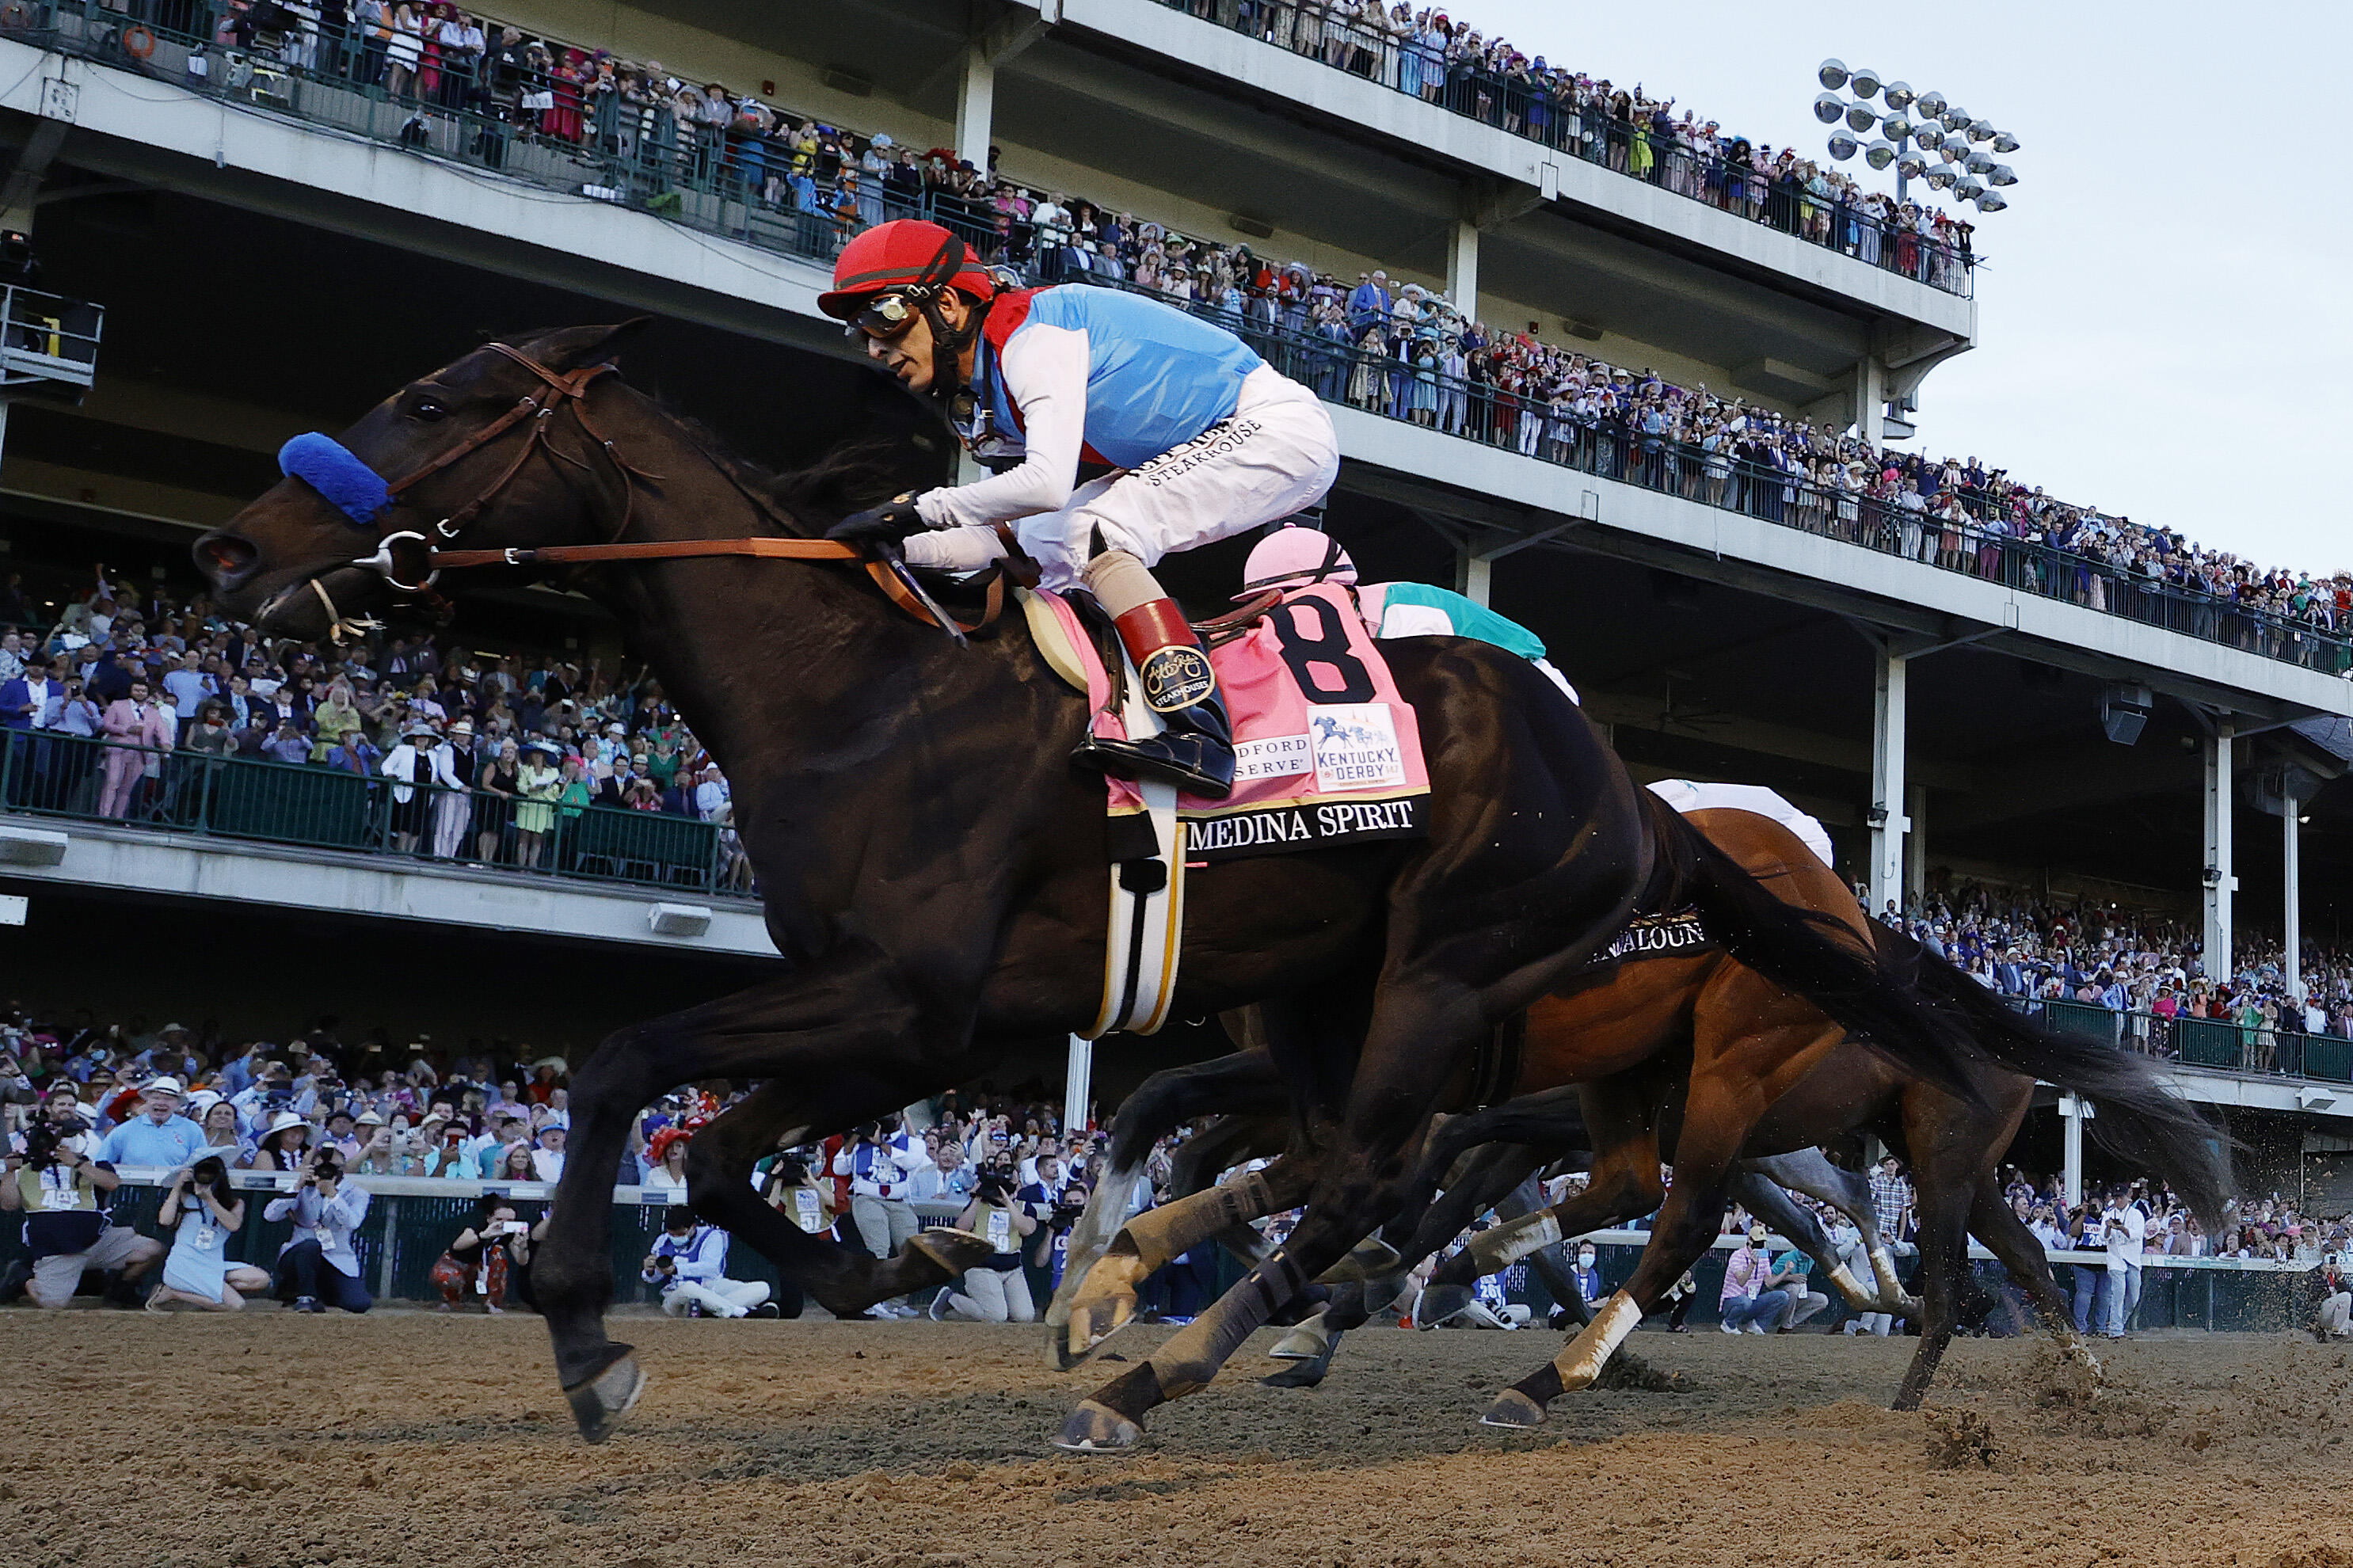 Trainer Says Kentucky Derby Winner Was Given Ointment Containing